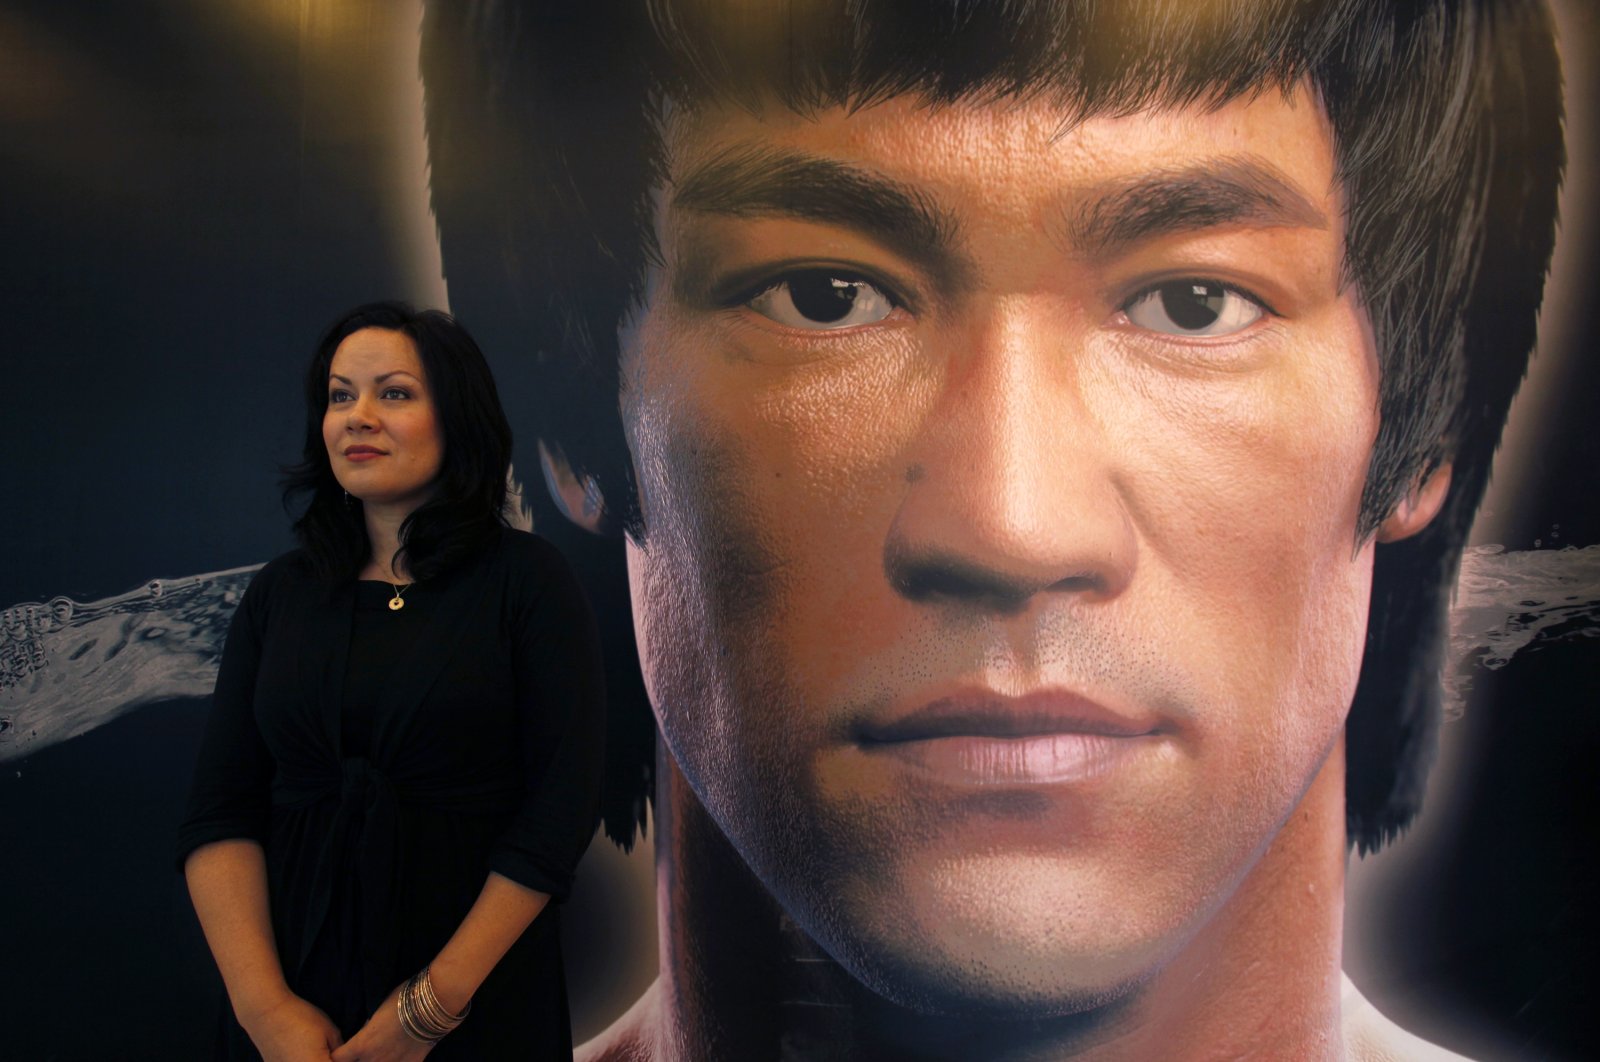 Shannon Lee, daughter of the late kung fu legend Bruce Lee, poses in front of a portrait of her father at the Hong Kong Heritage Museum, July 18, 2013. (REUTERS)